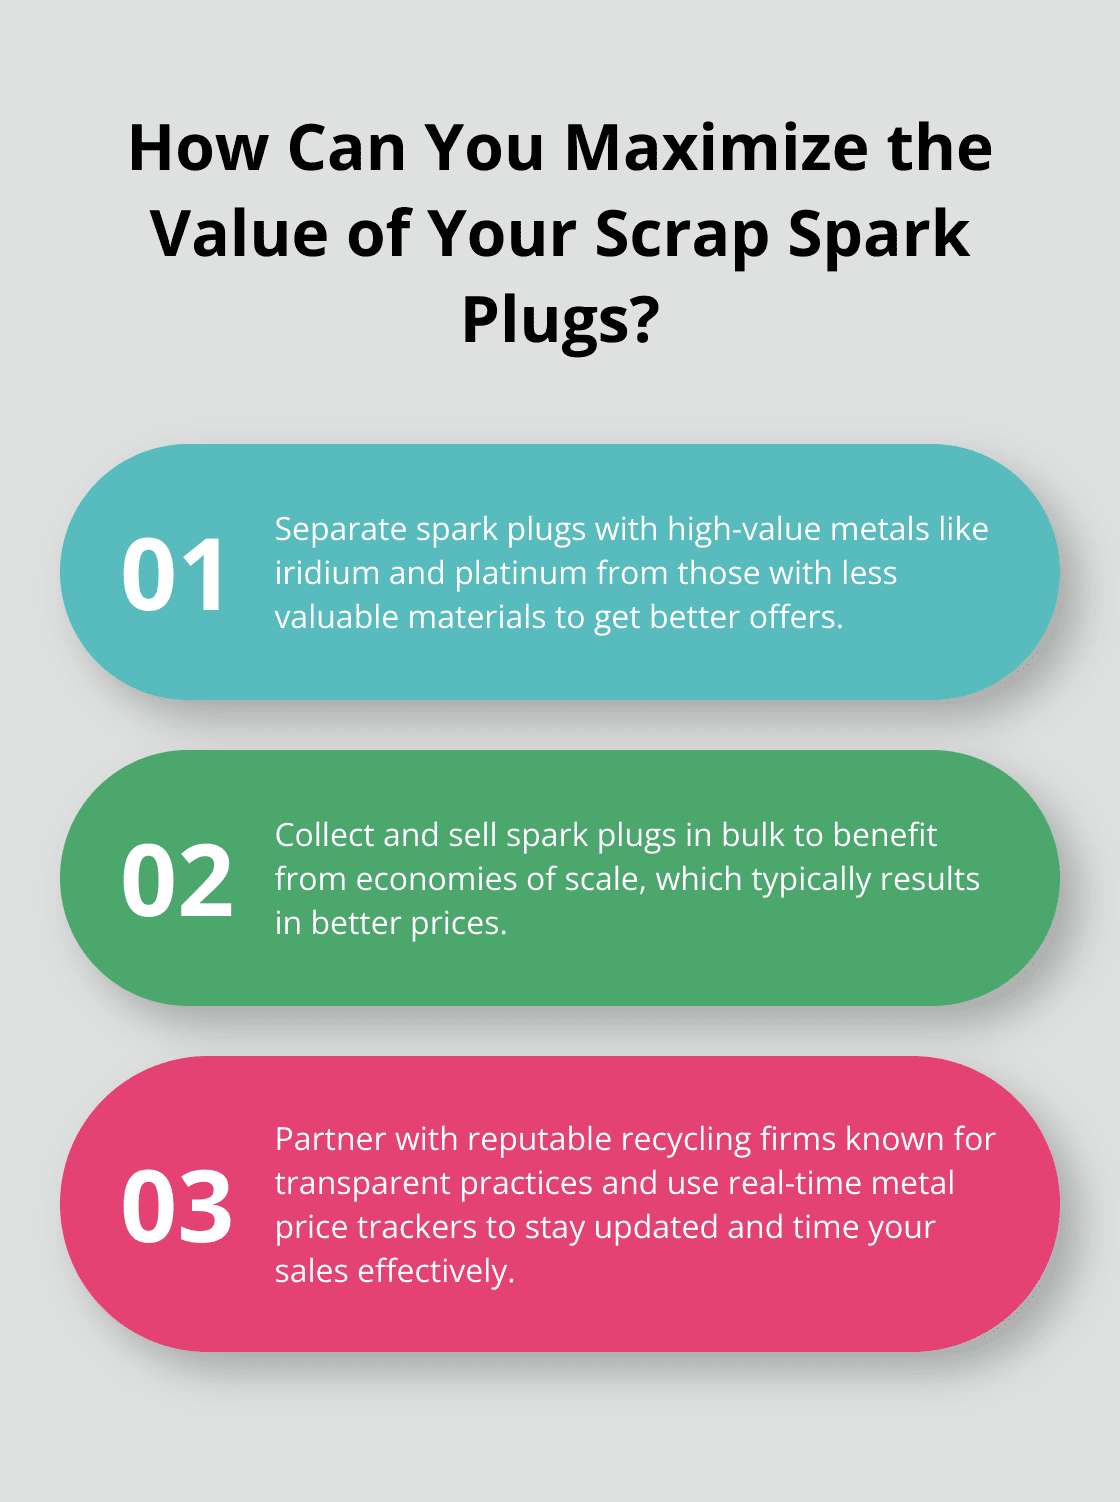 Fact - How Can You Maximize the Value of Your Scrap Spark Plugs?